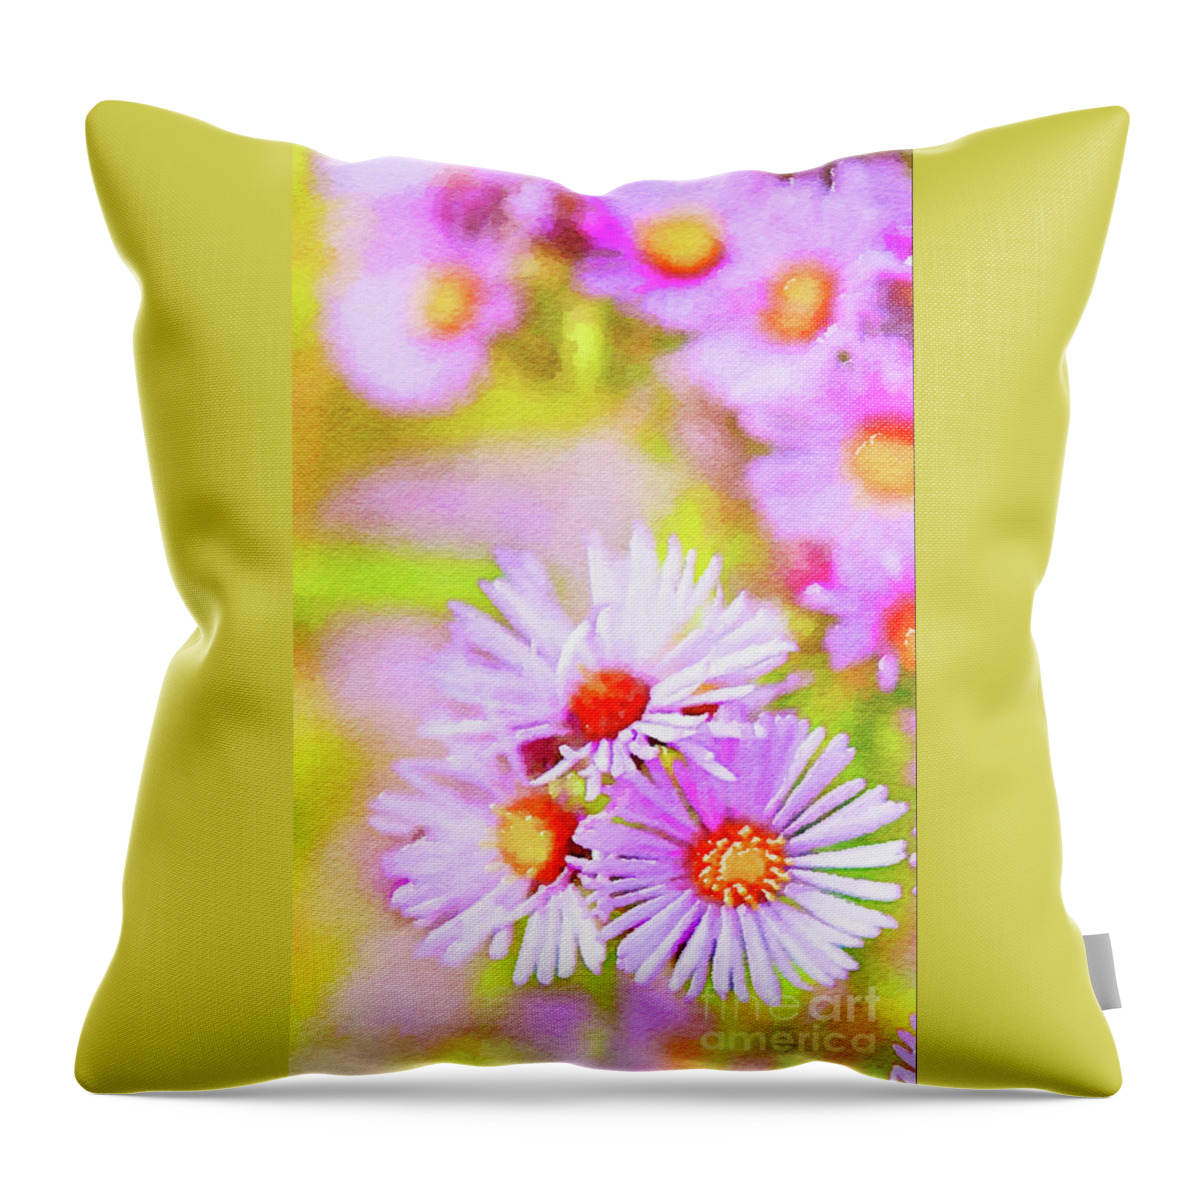 Purple Flowers Throw Pillow featuring the painting Purple Flowers by Cara Frafjord